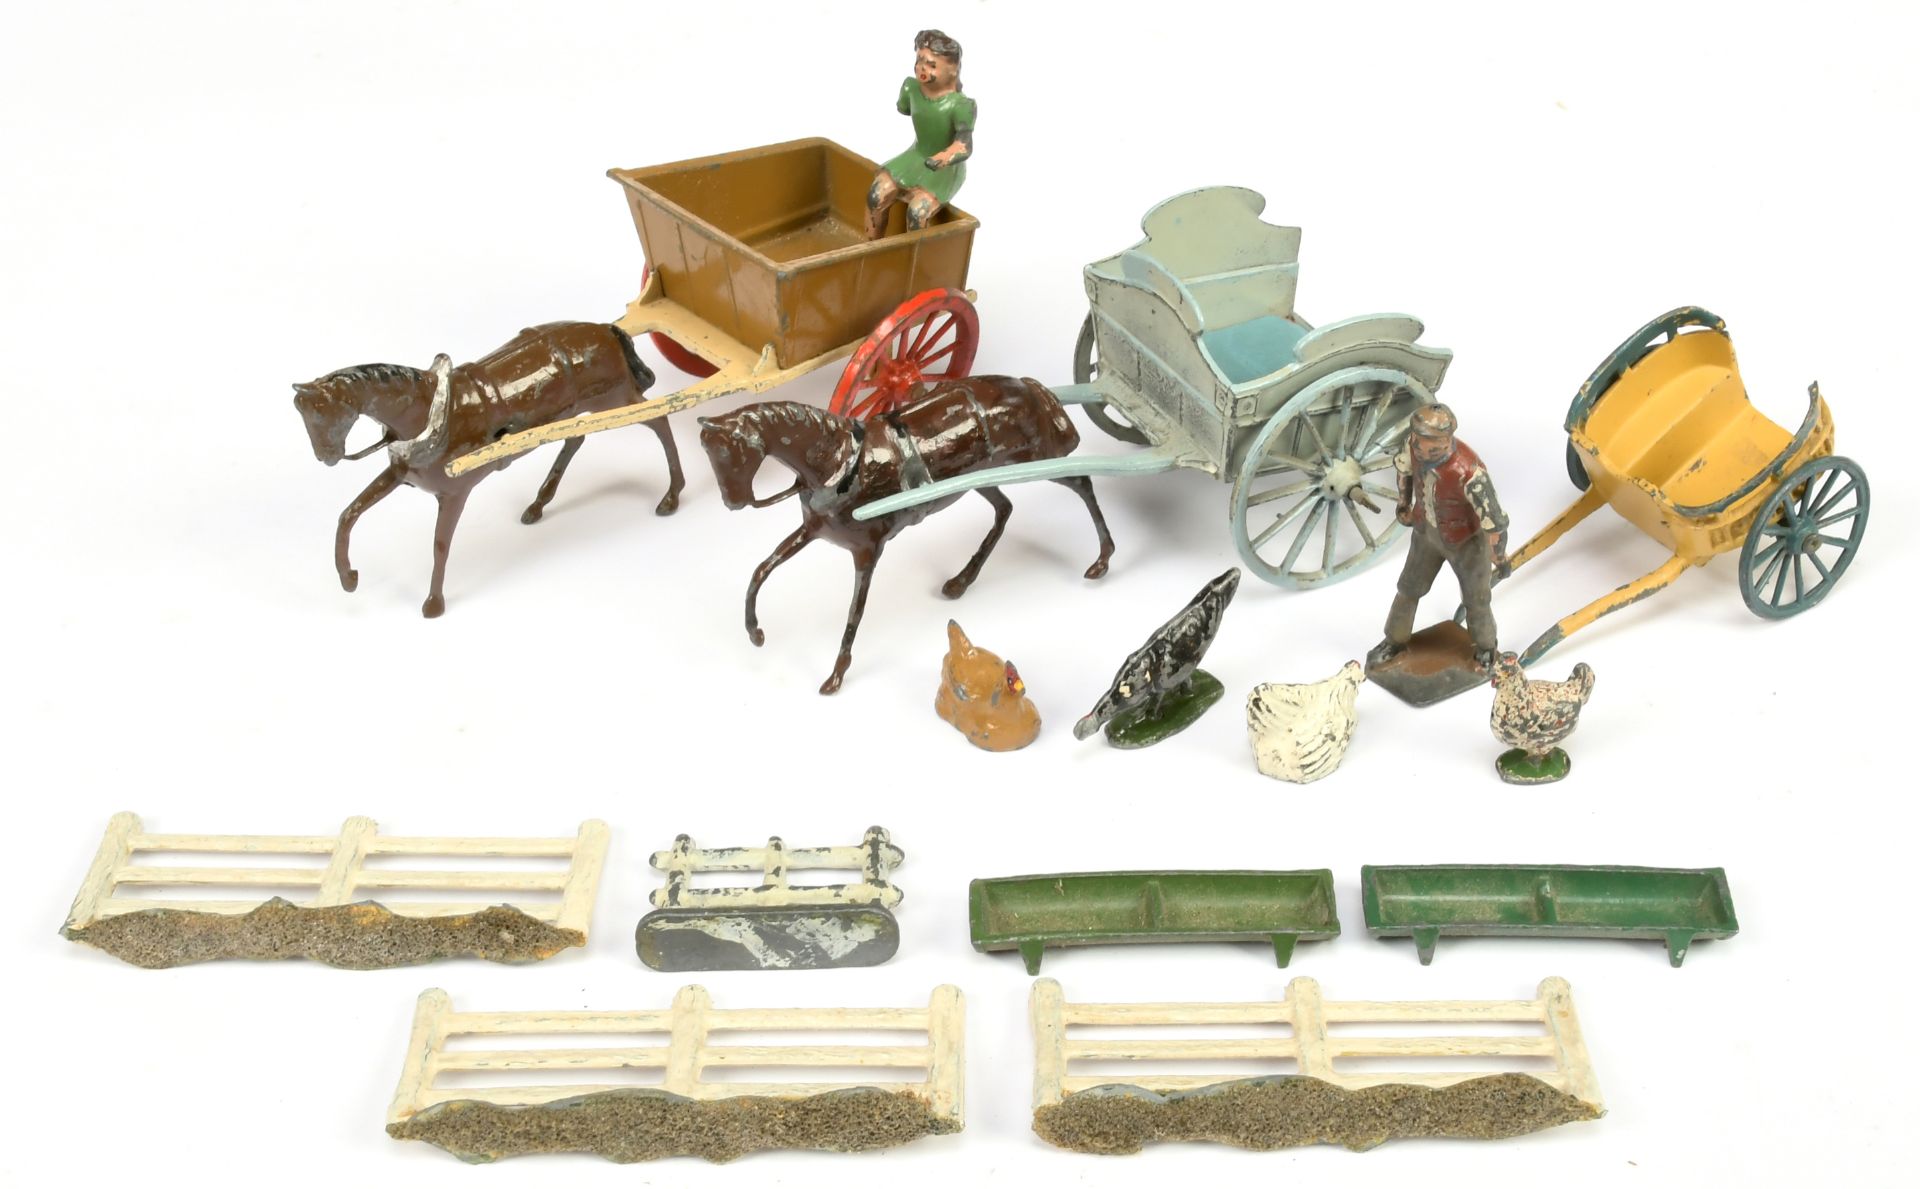 Britains and Taylor & Barret - A Group of Farm Carts and Accessories